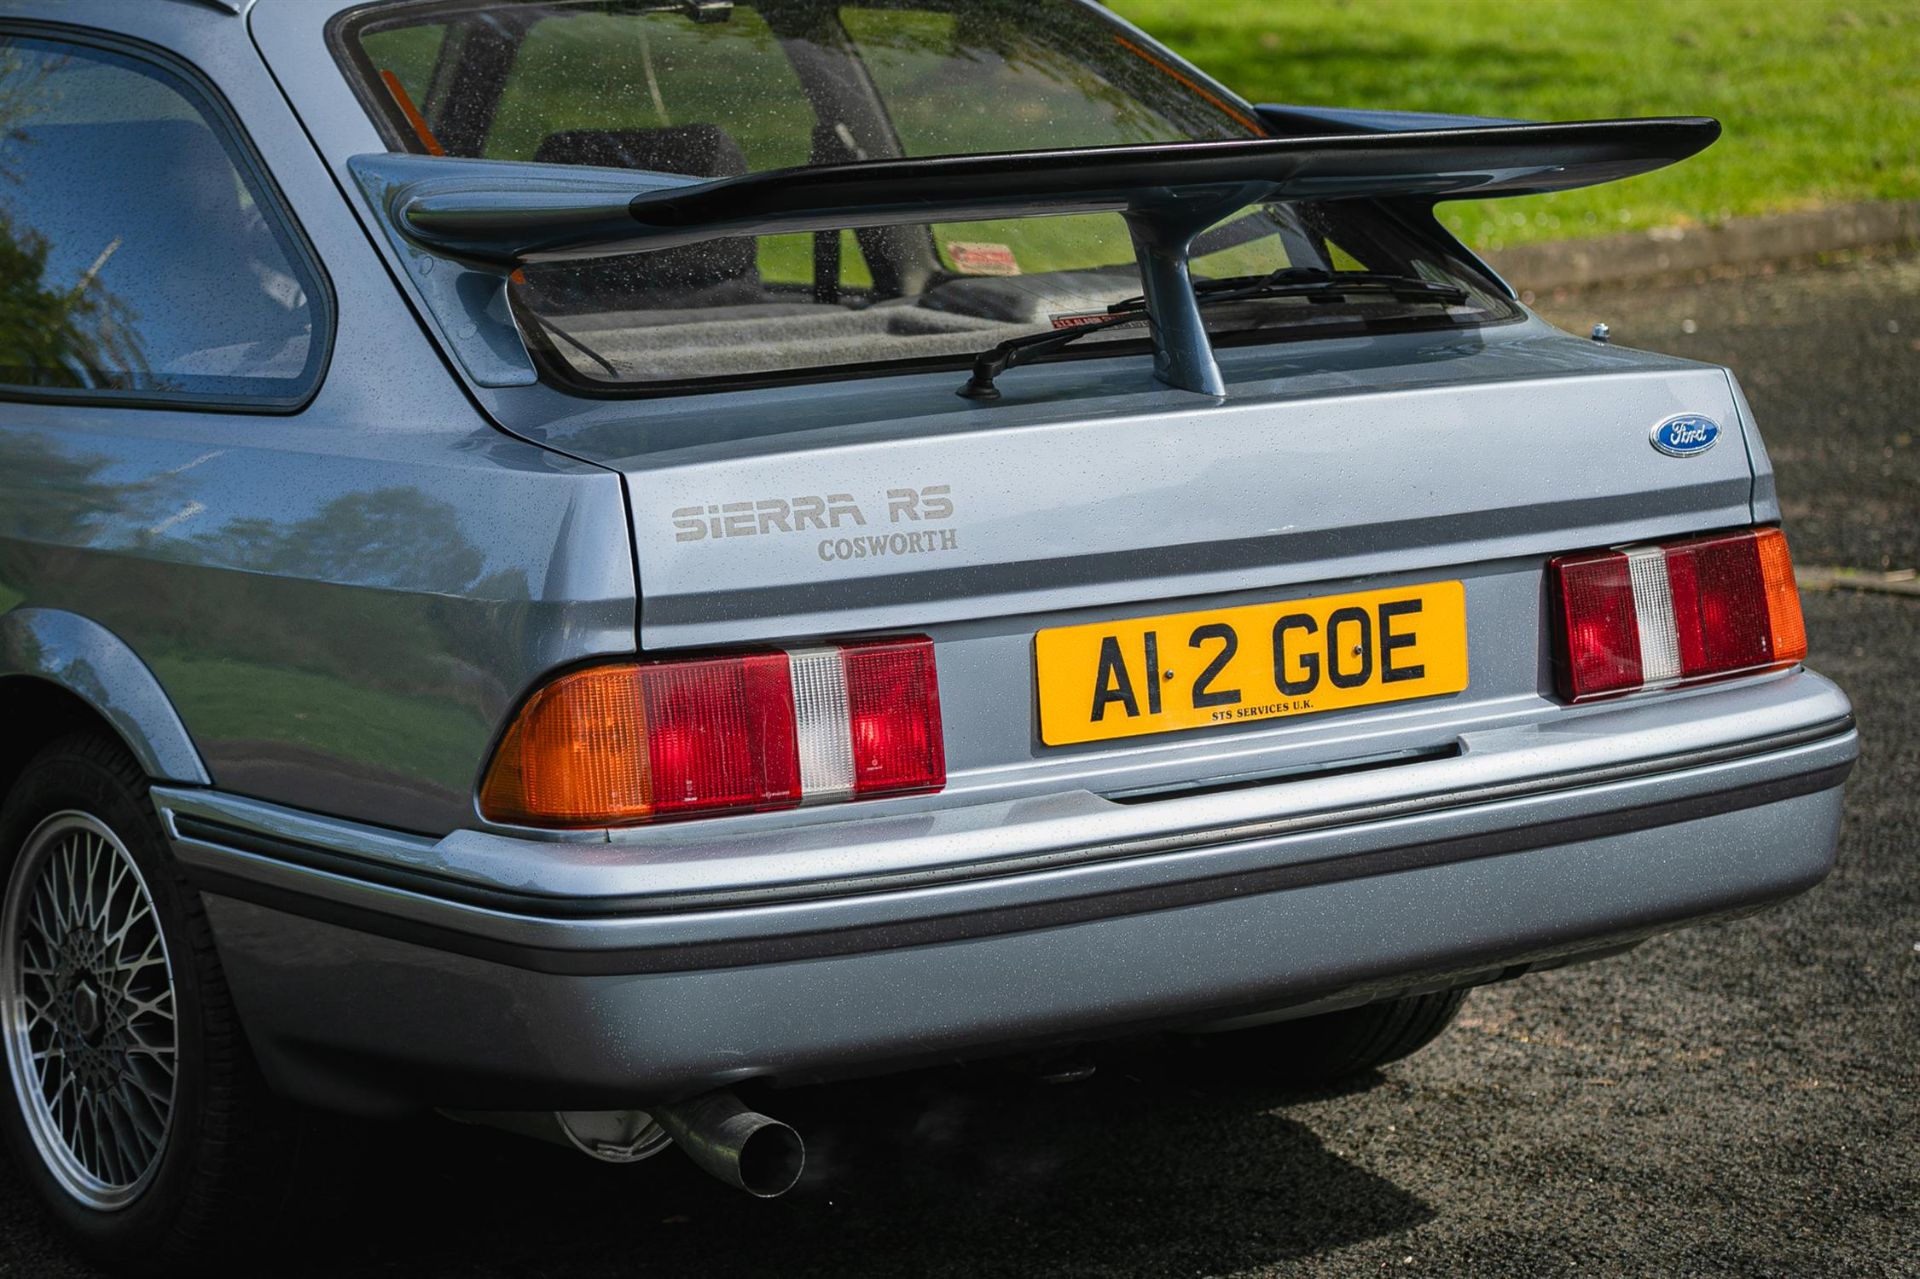 1986 Ford Sierra RS Cosworth - Image 9 of 10